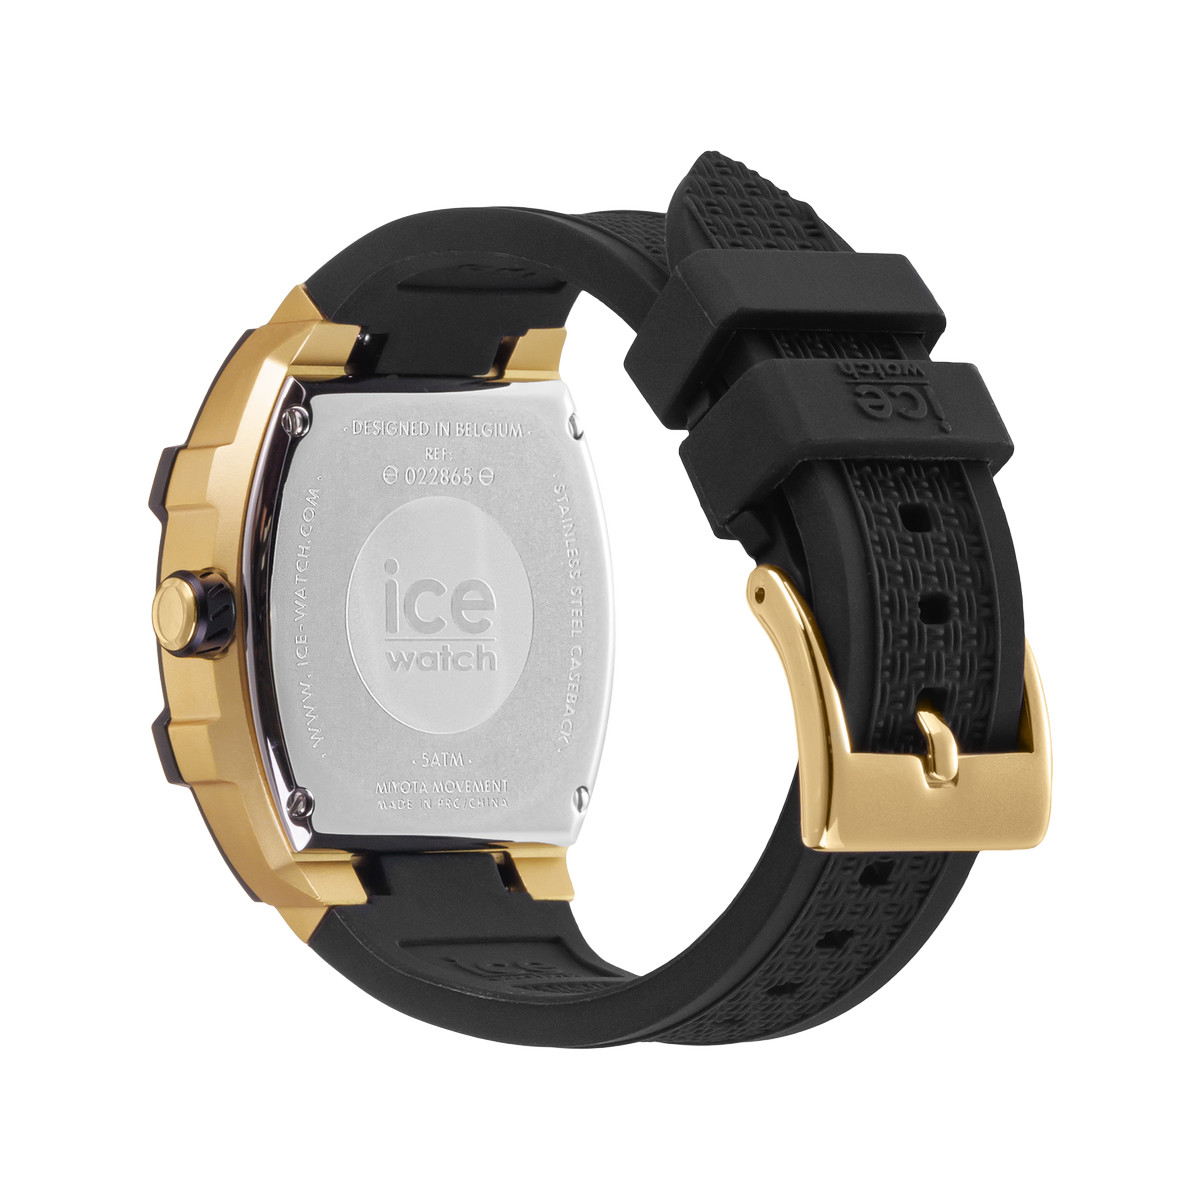 Montre ICE WATCH Ice boliday femme bracelet silicone noir - vue 3